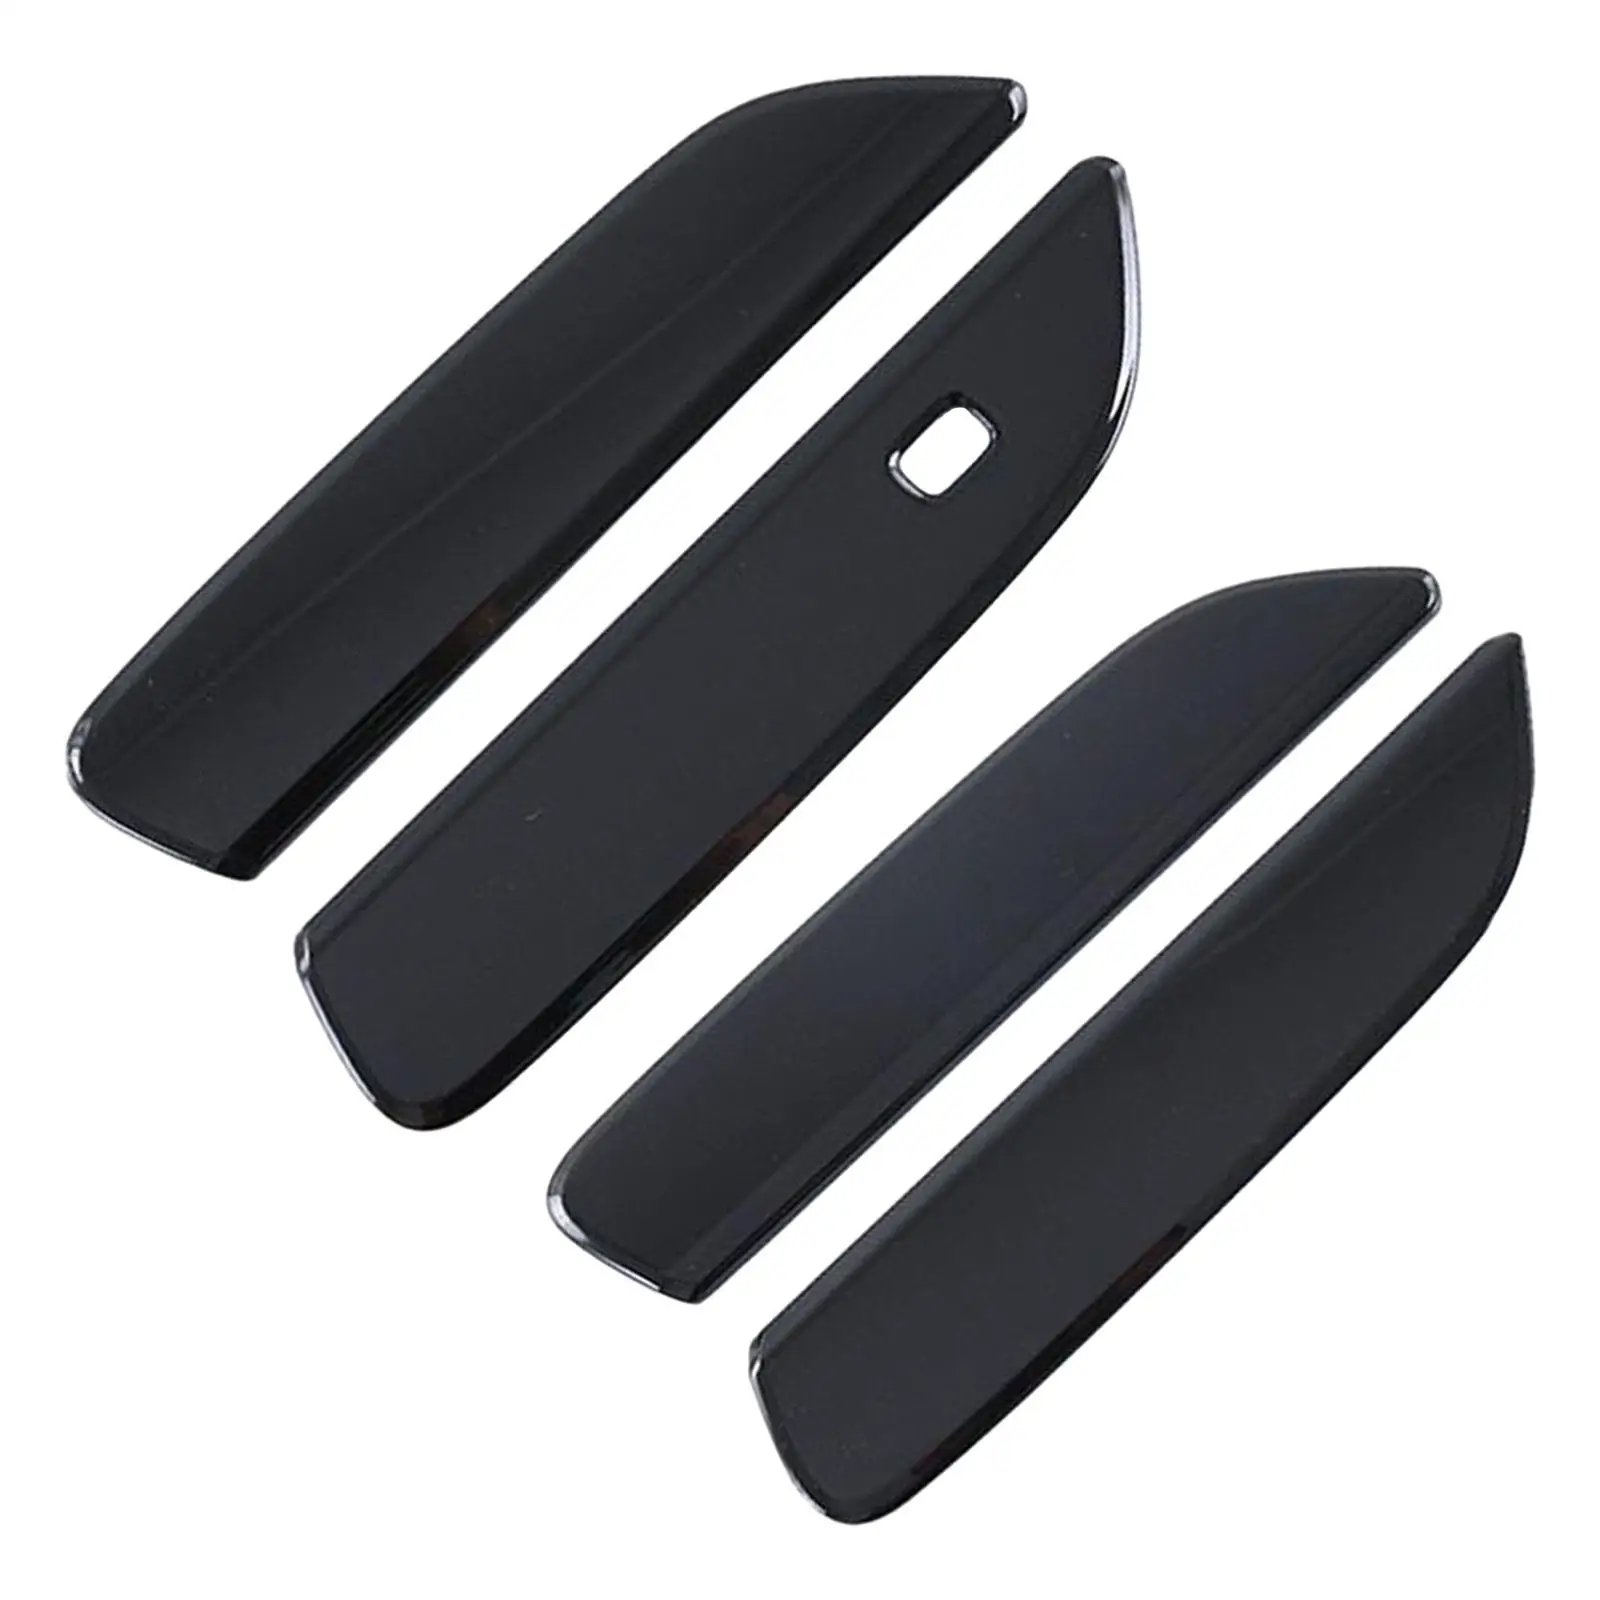 4Pcs Car Door Handle Covers Protection Cover for Byd Dolphin 2022 2023